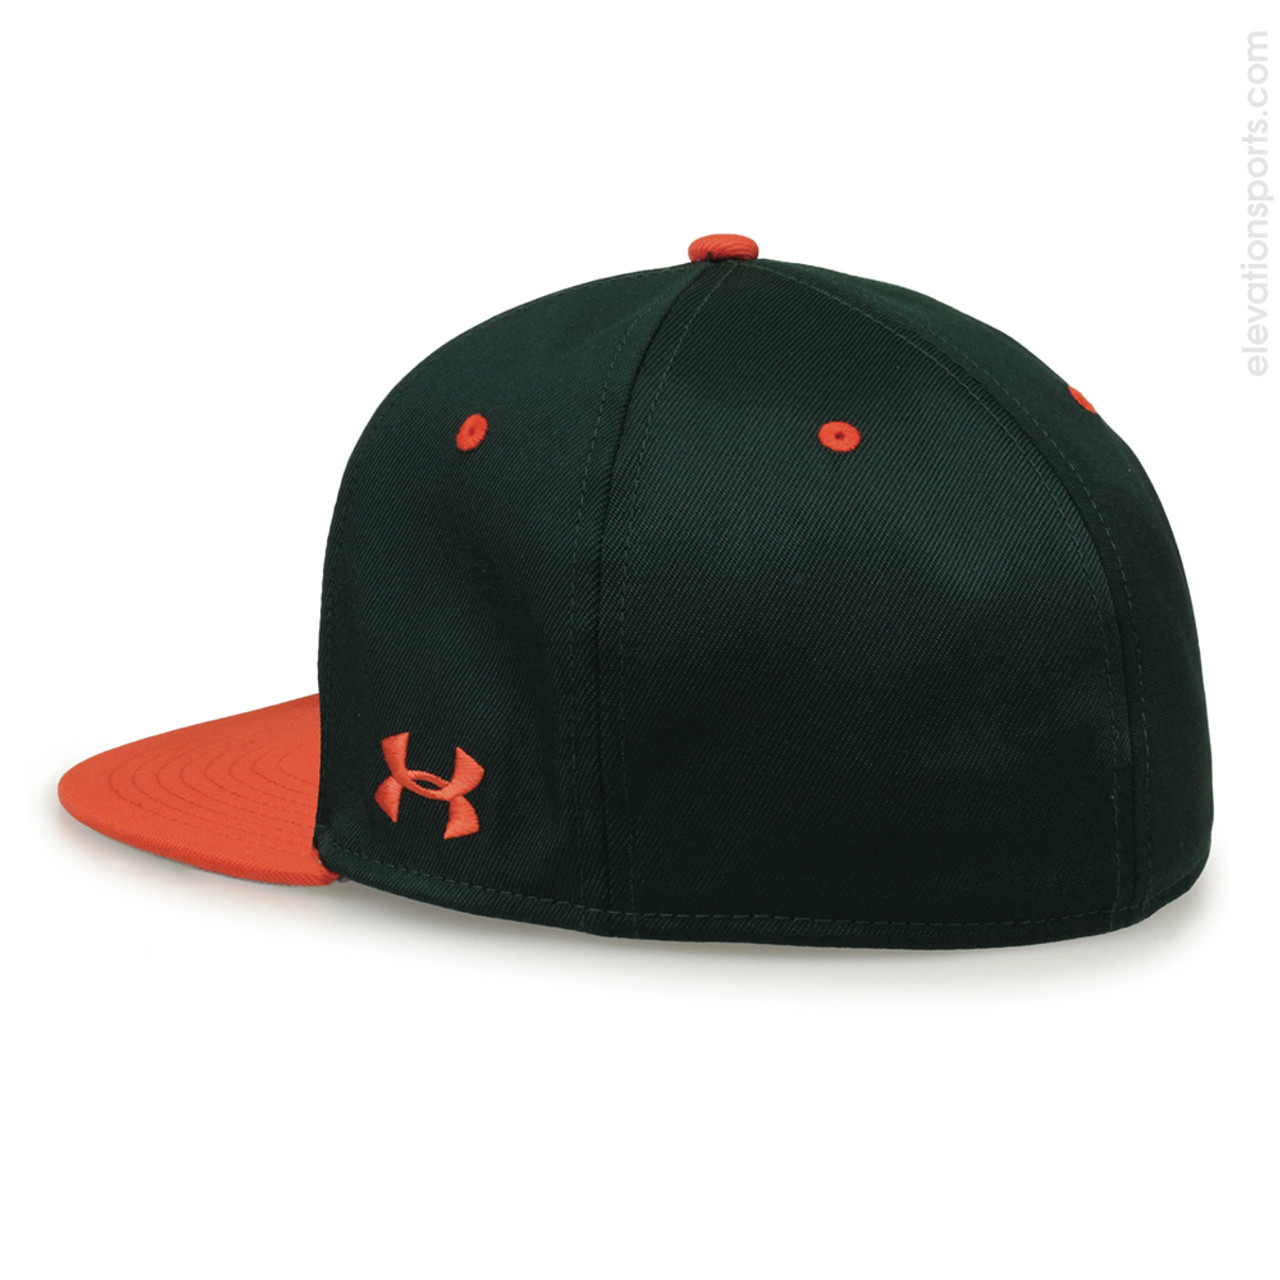 Under Armour Curved Bill Cap With Custom Embroidered Logo